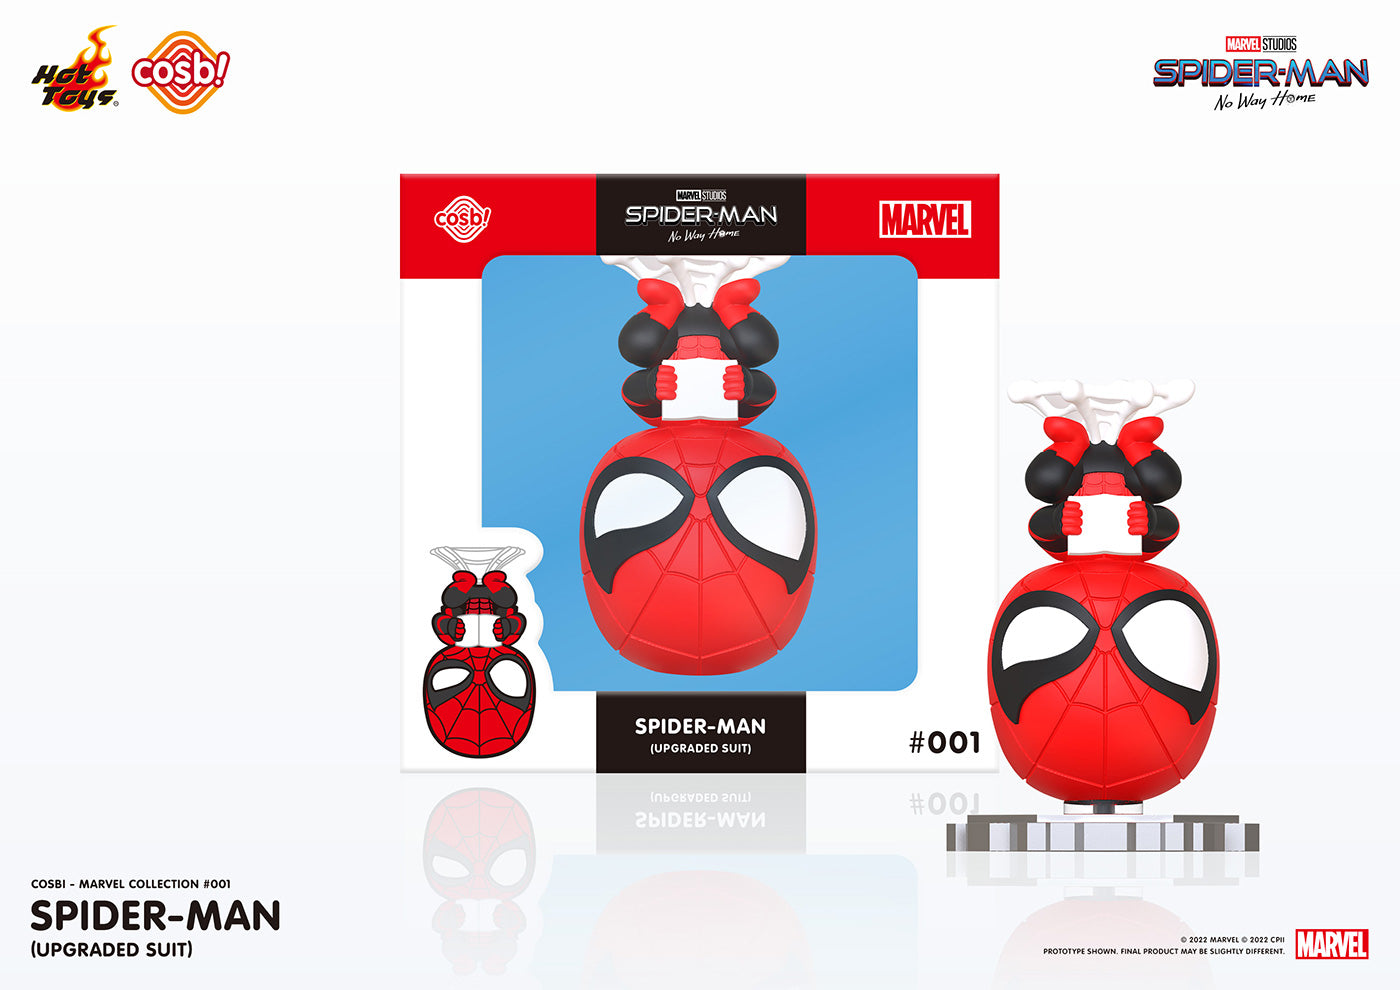 Cosbi Marvel Collection #001 Spider-Man (Upgraded Suit) "Spider-Man: No Way Home"